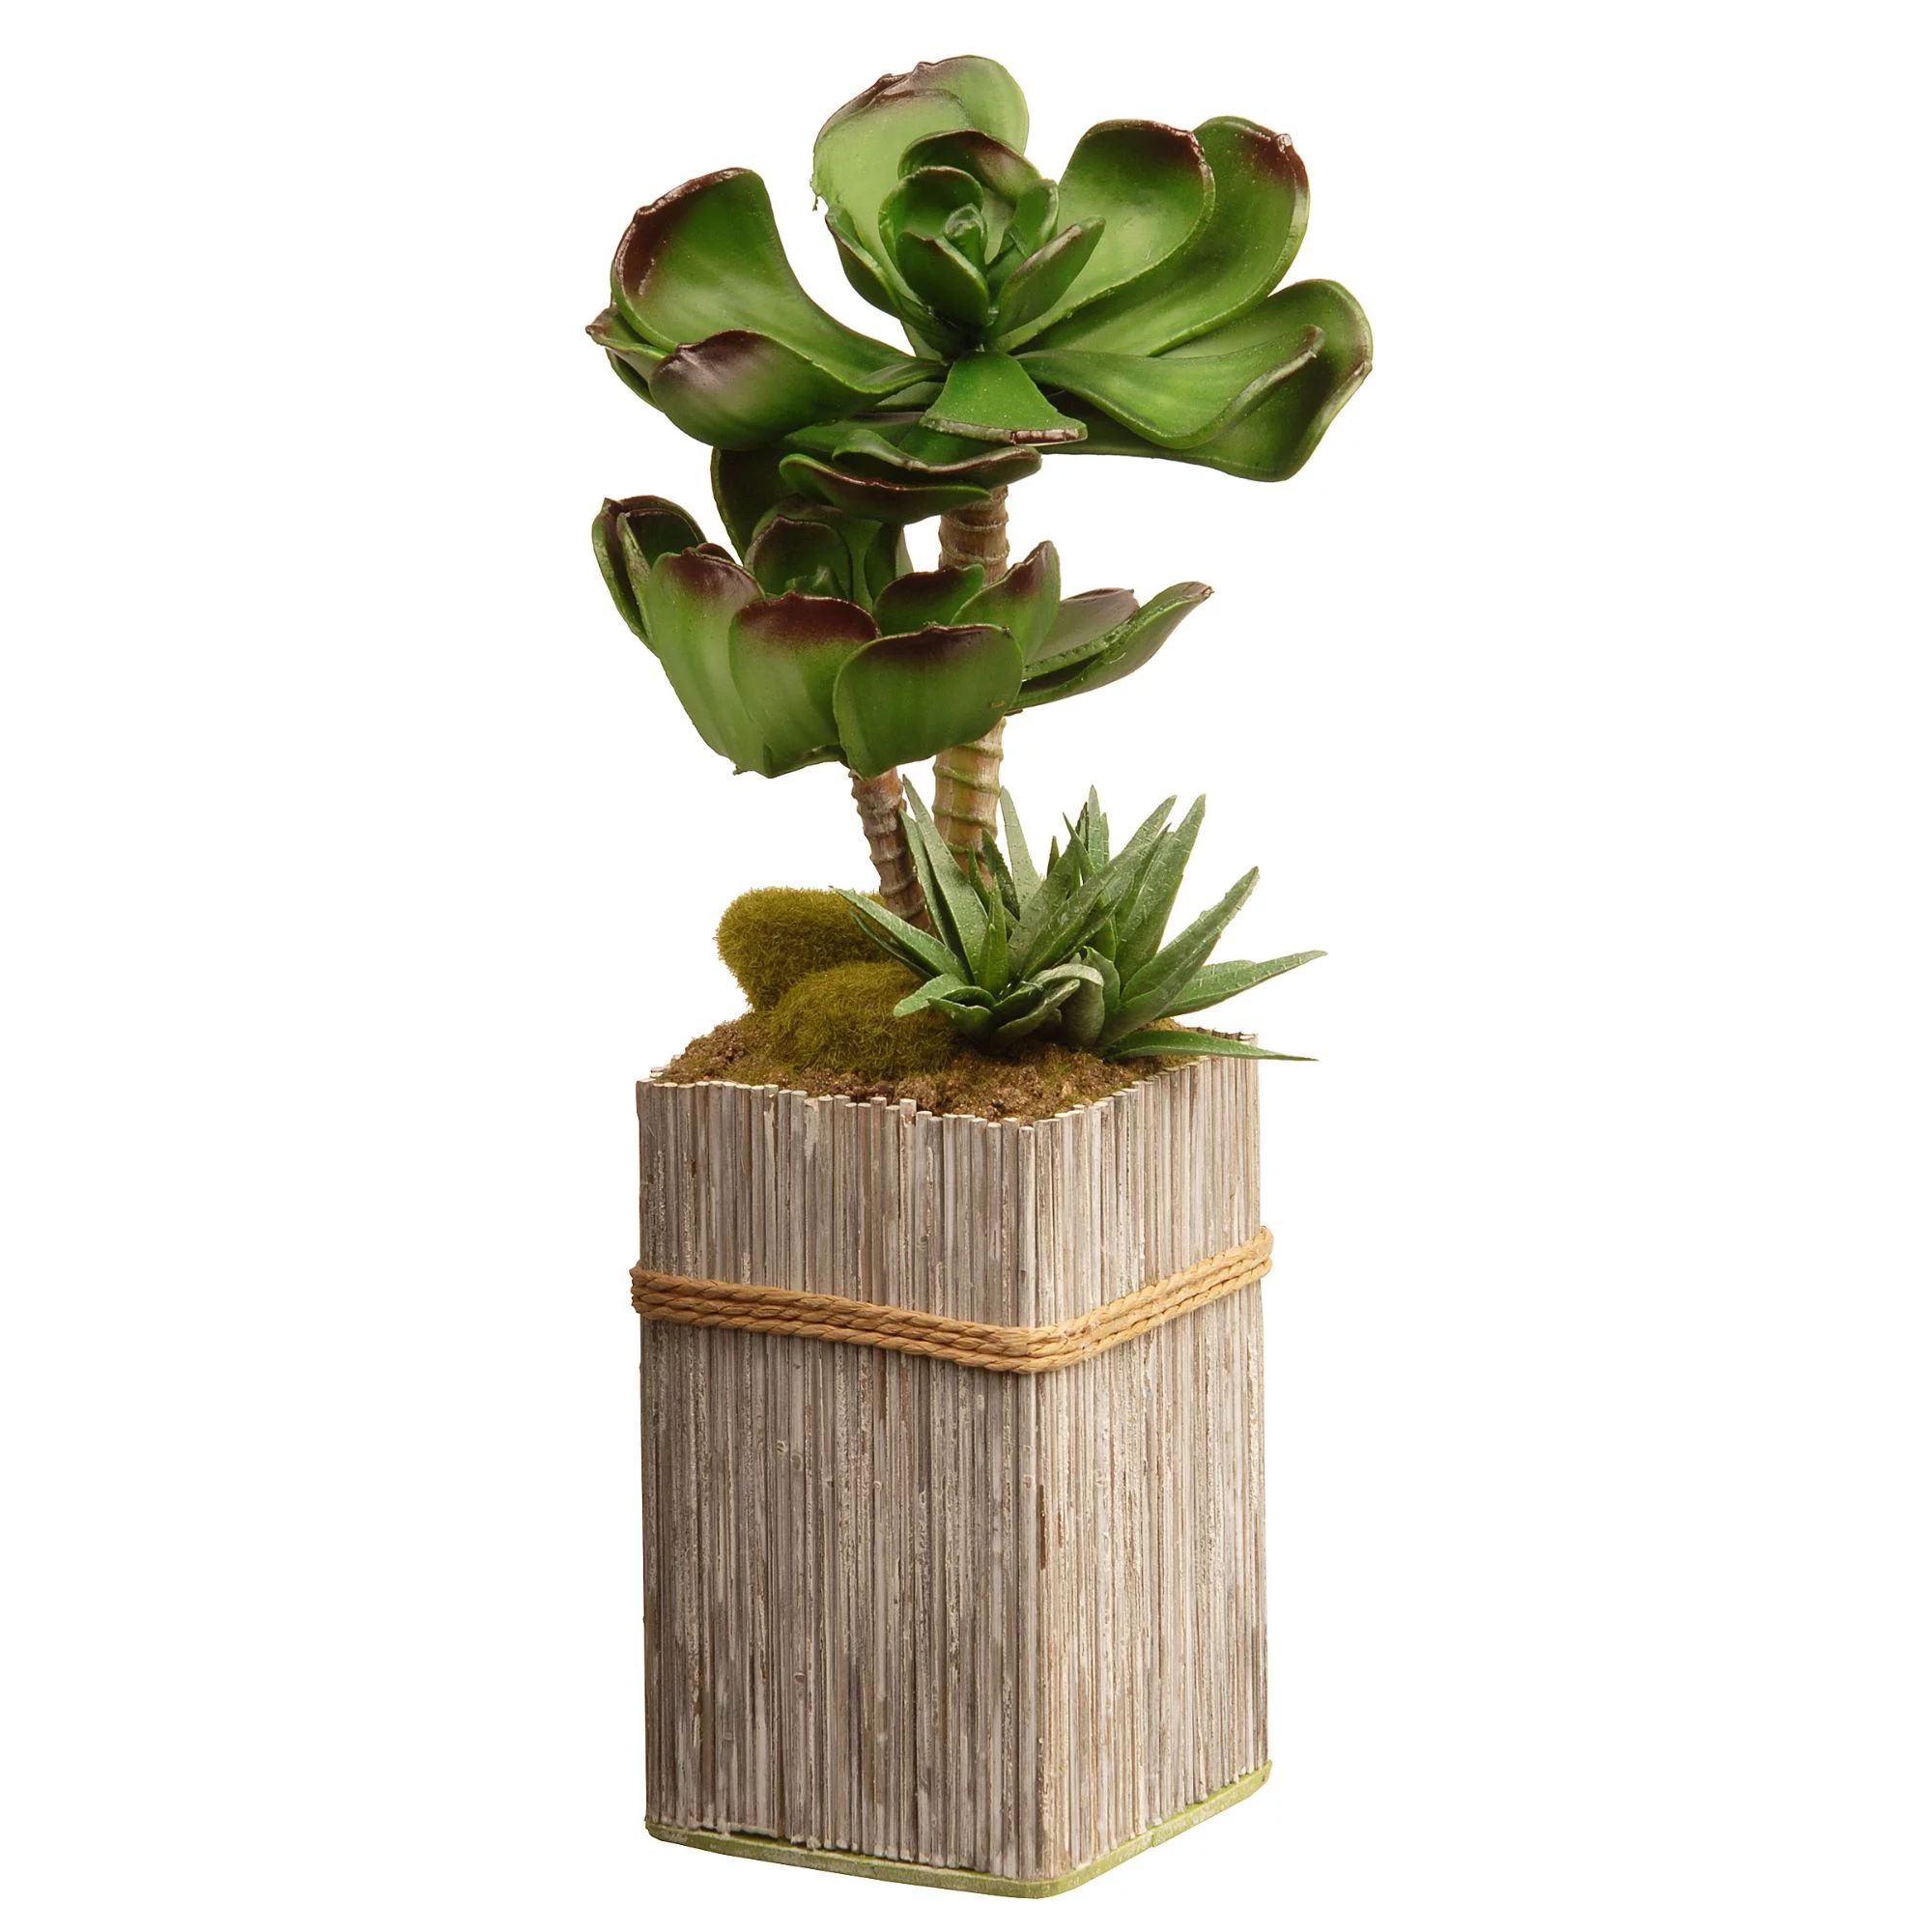 11" Green and Brown Potted Artificial Succulent Plant Garden Accents | Walmart (US)